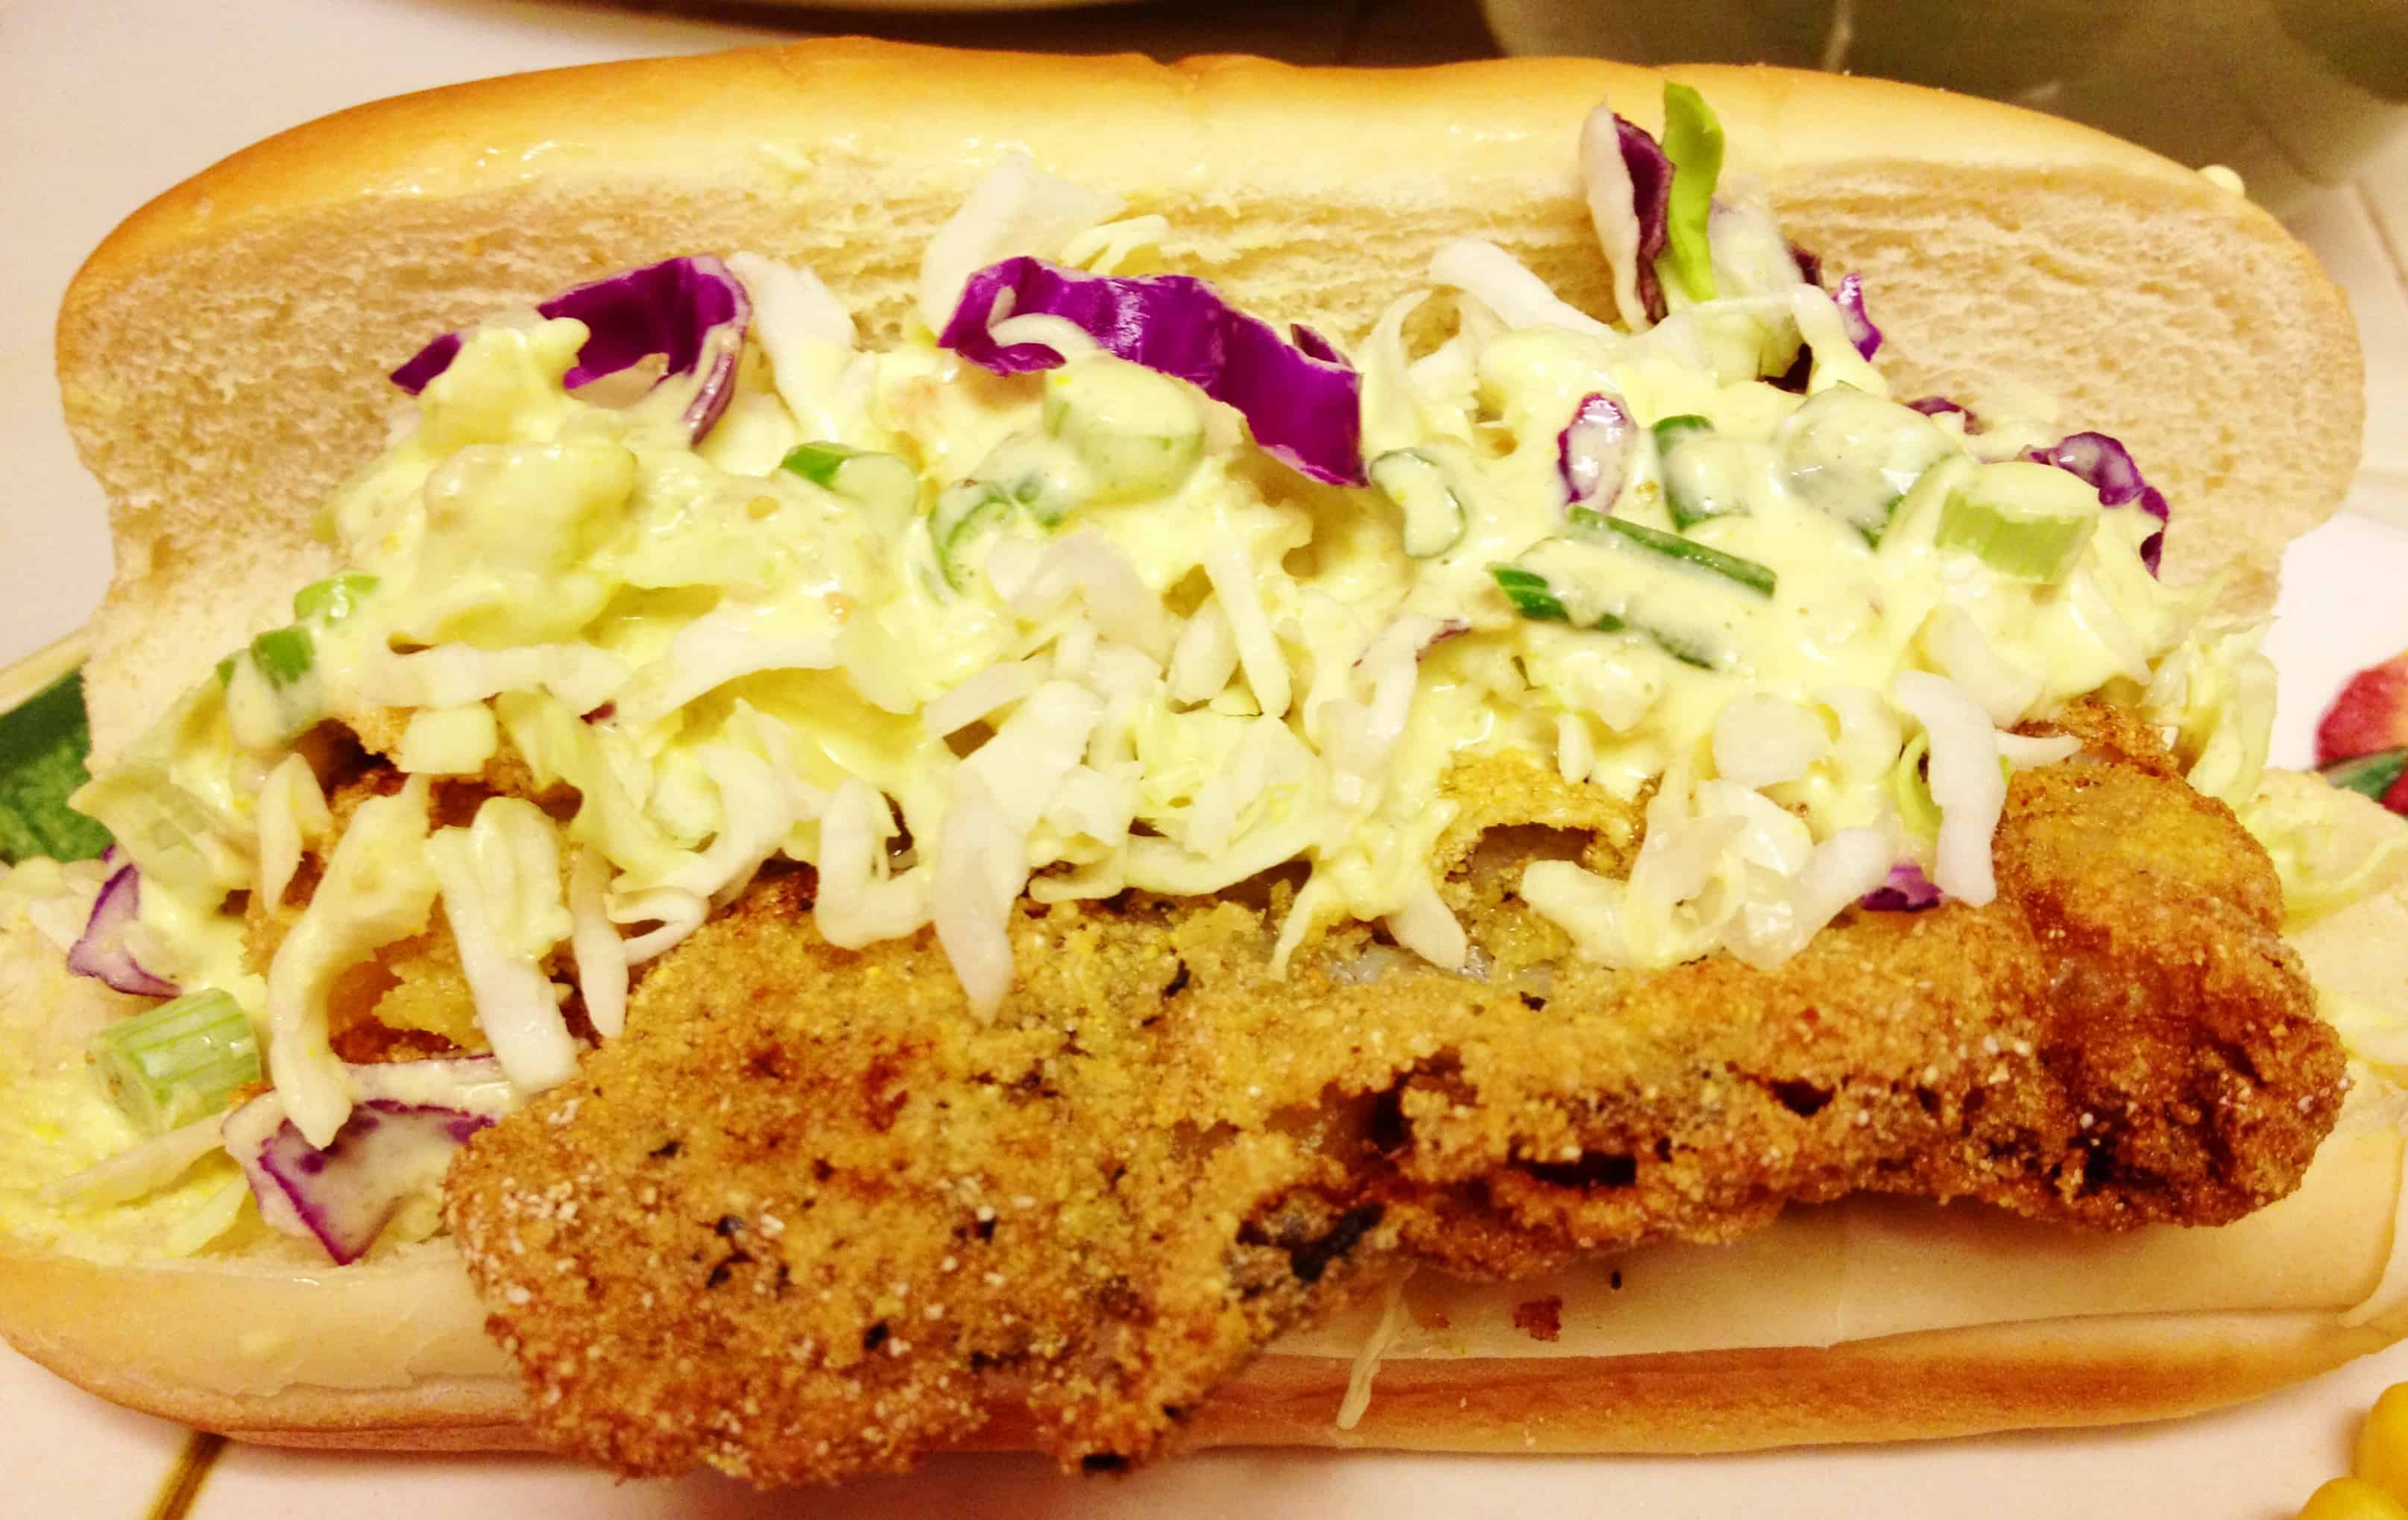 fried fish sandwich with coleslaw